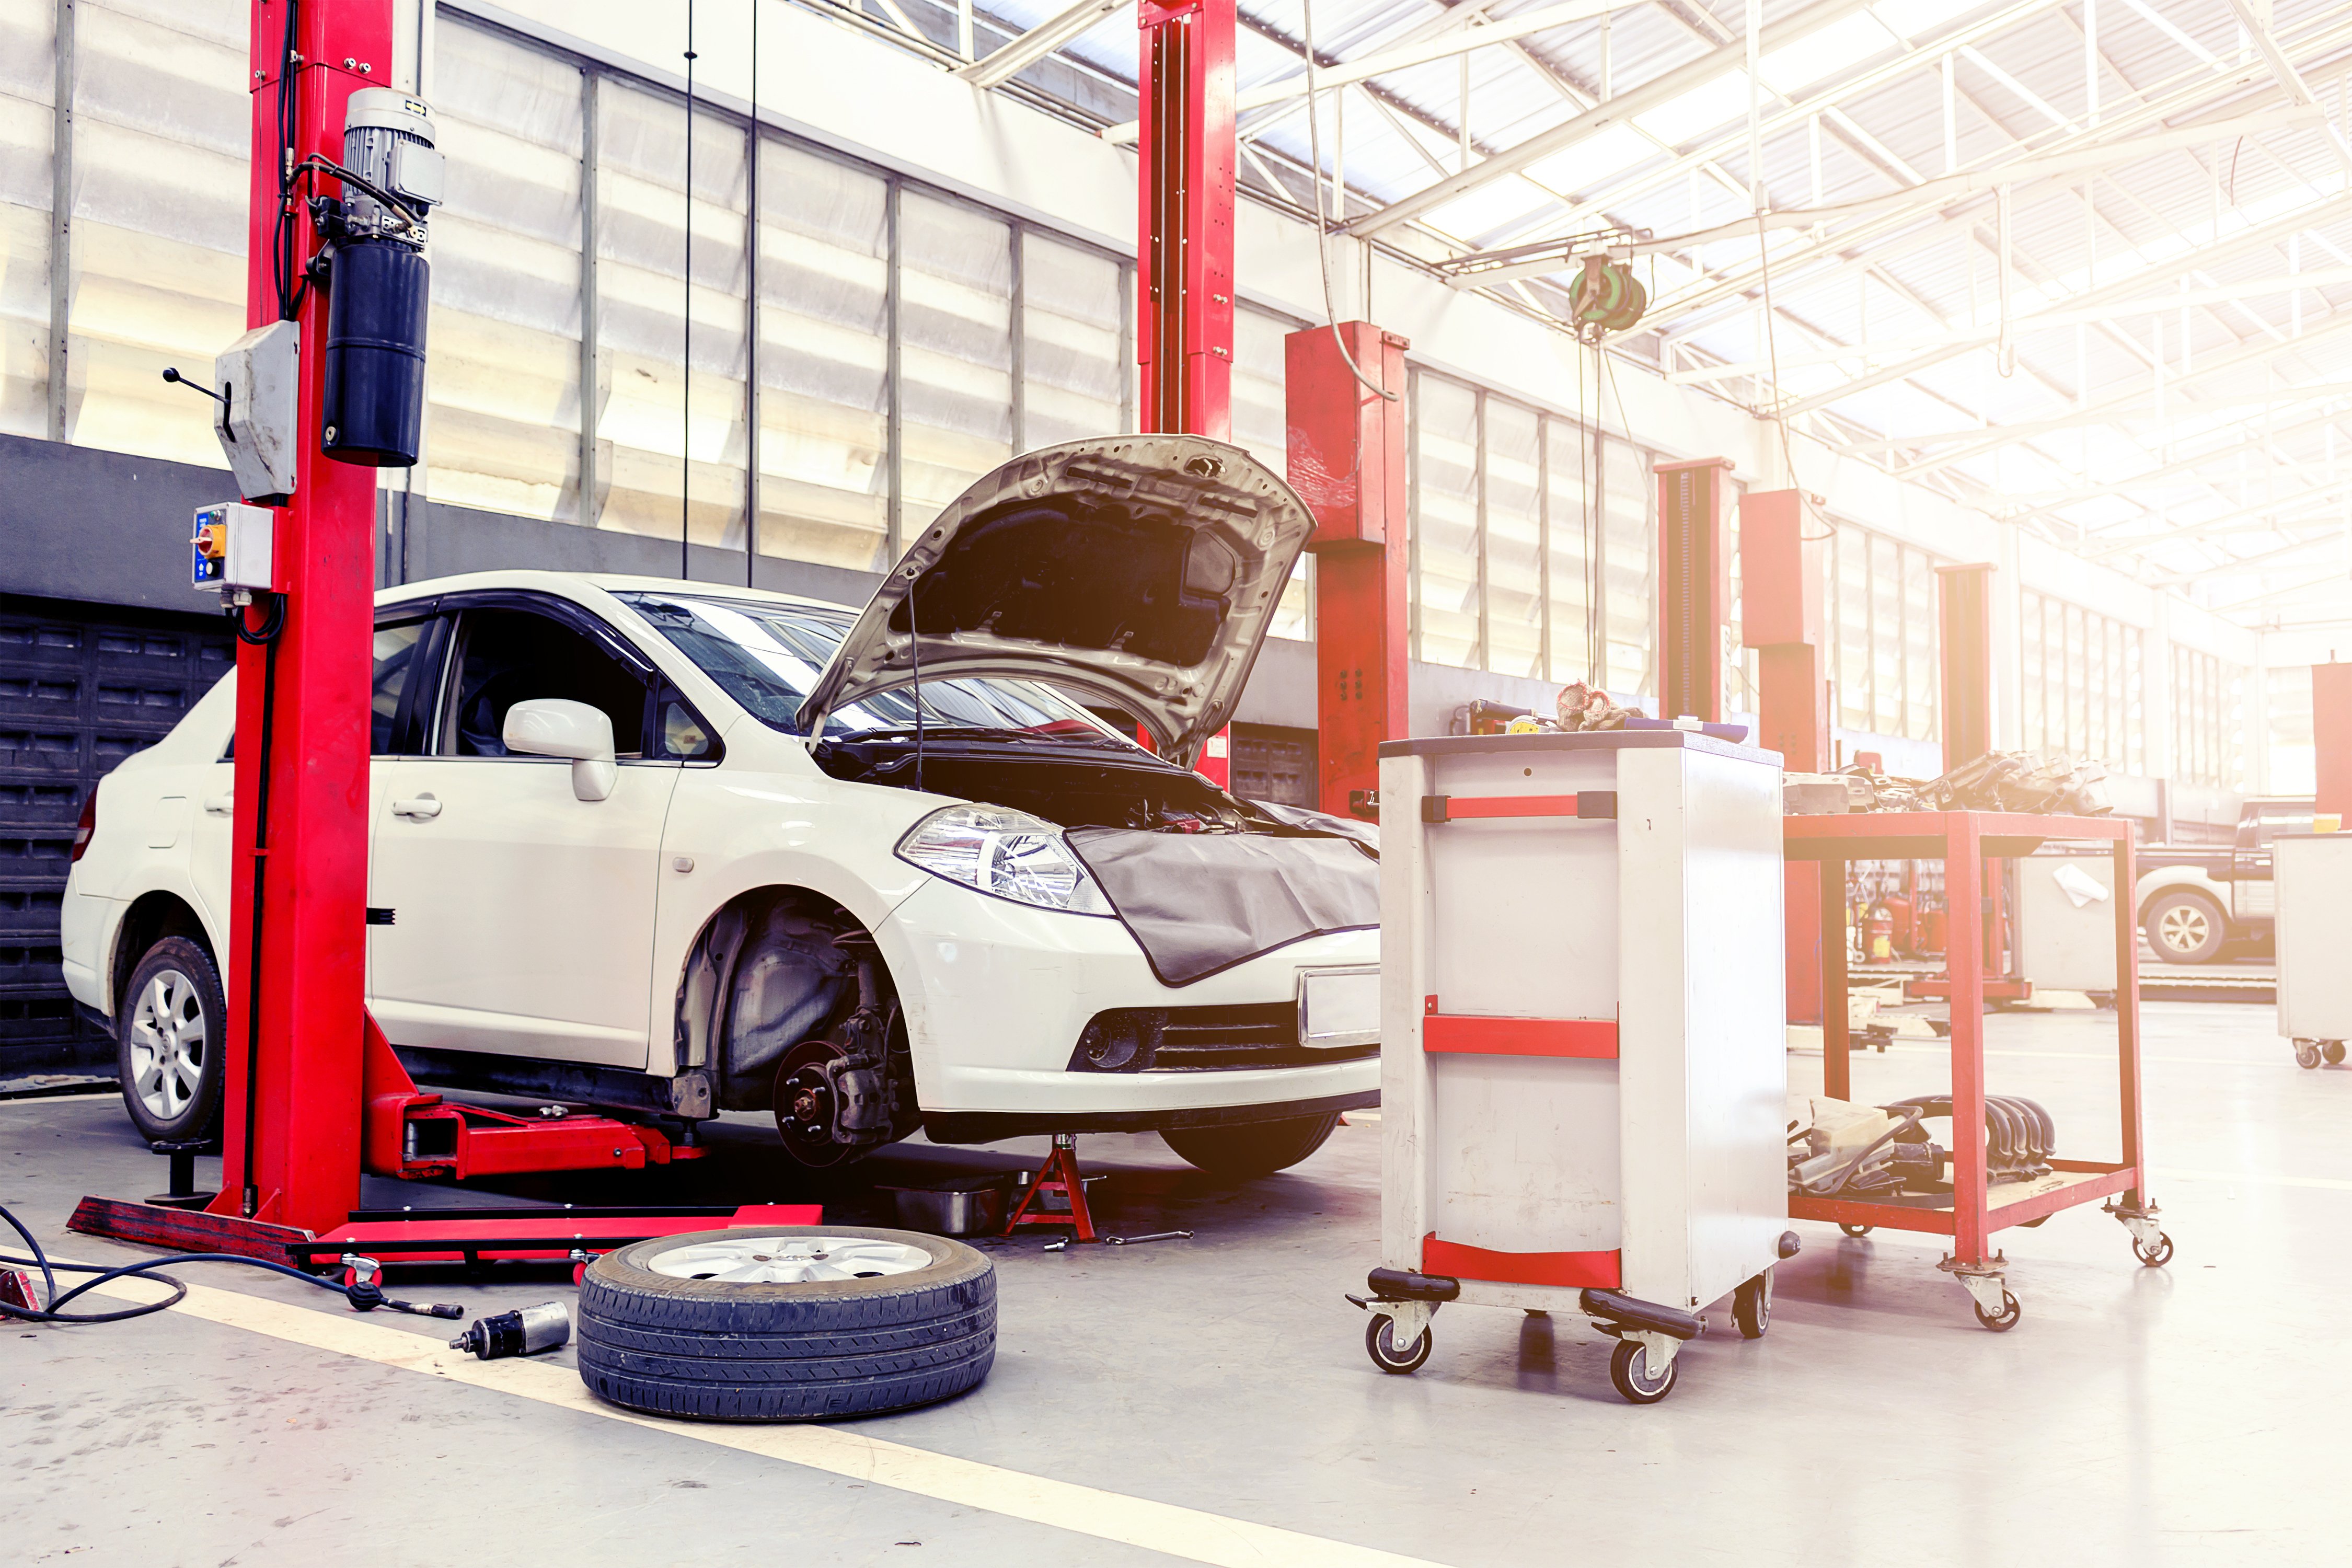 Try These Out - of - the - Box Auto Repair Marketing Ideas